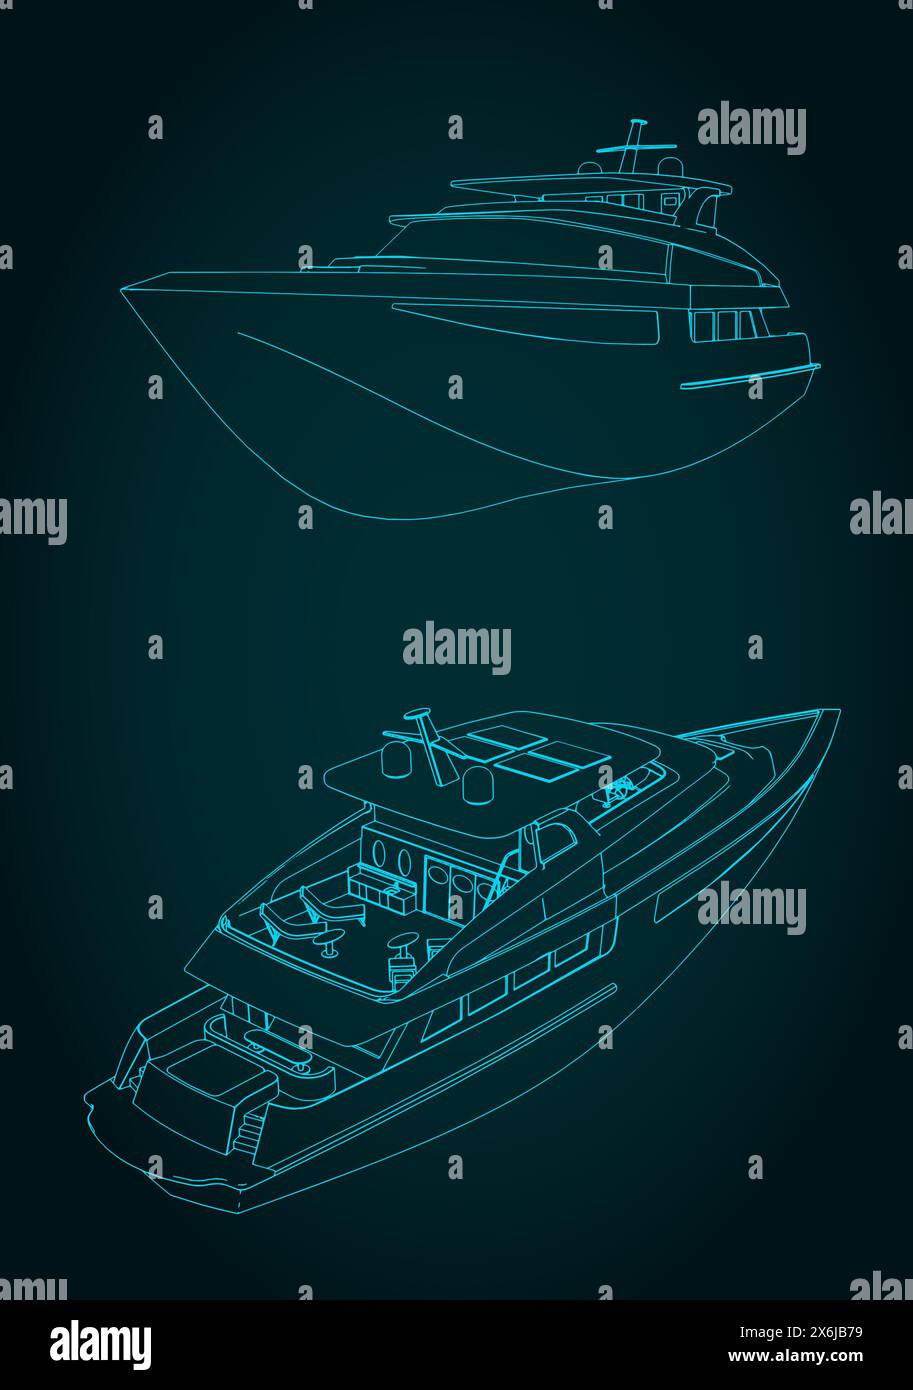 Stylized vector illustration of drawings of a luxury yacht Stock Vector